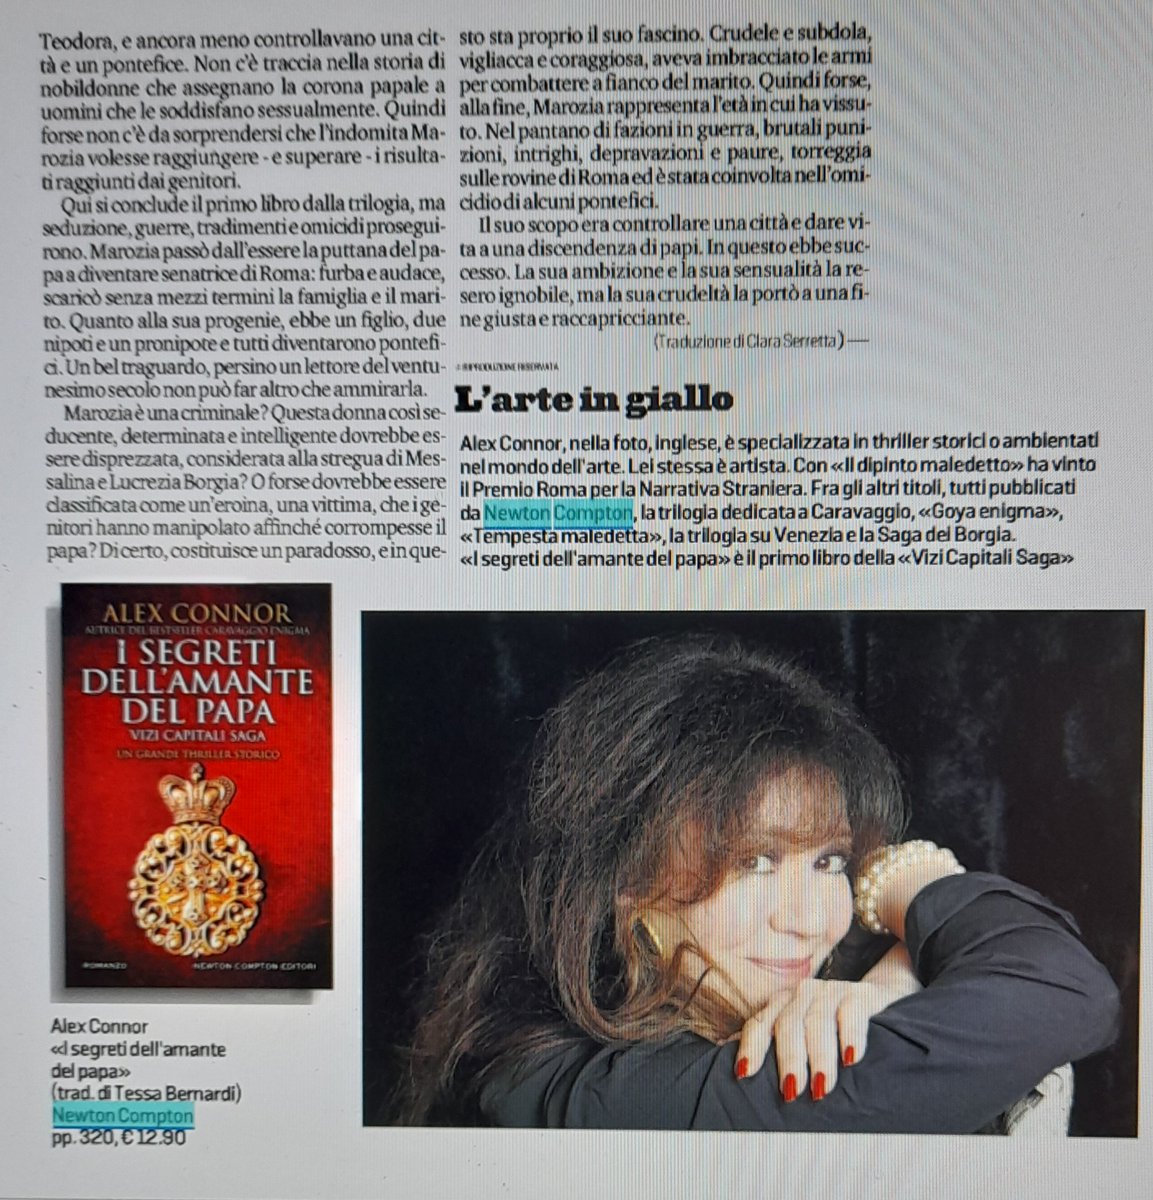 My article in Tuttolibri, La Stampa today. Grazie The story of the infamous 'Pornopapacy' when Popes were under the boot of the Tusculani and the notorious she wolves of Rome, Theodora and Marozia. @NewtonCompton #Marozia #Tusculani #corruption #murder #sexual intrigue #Medieval